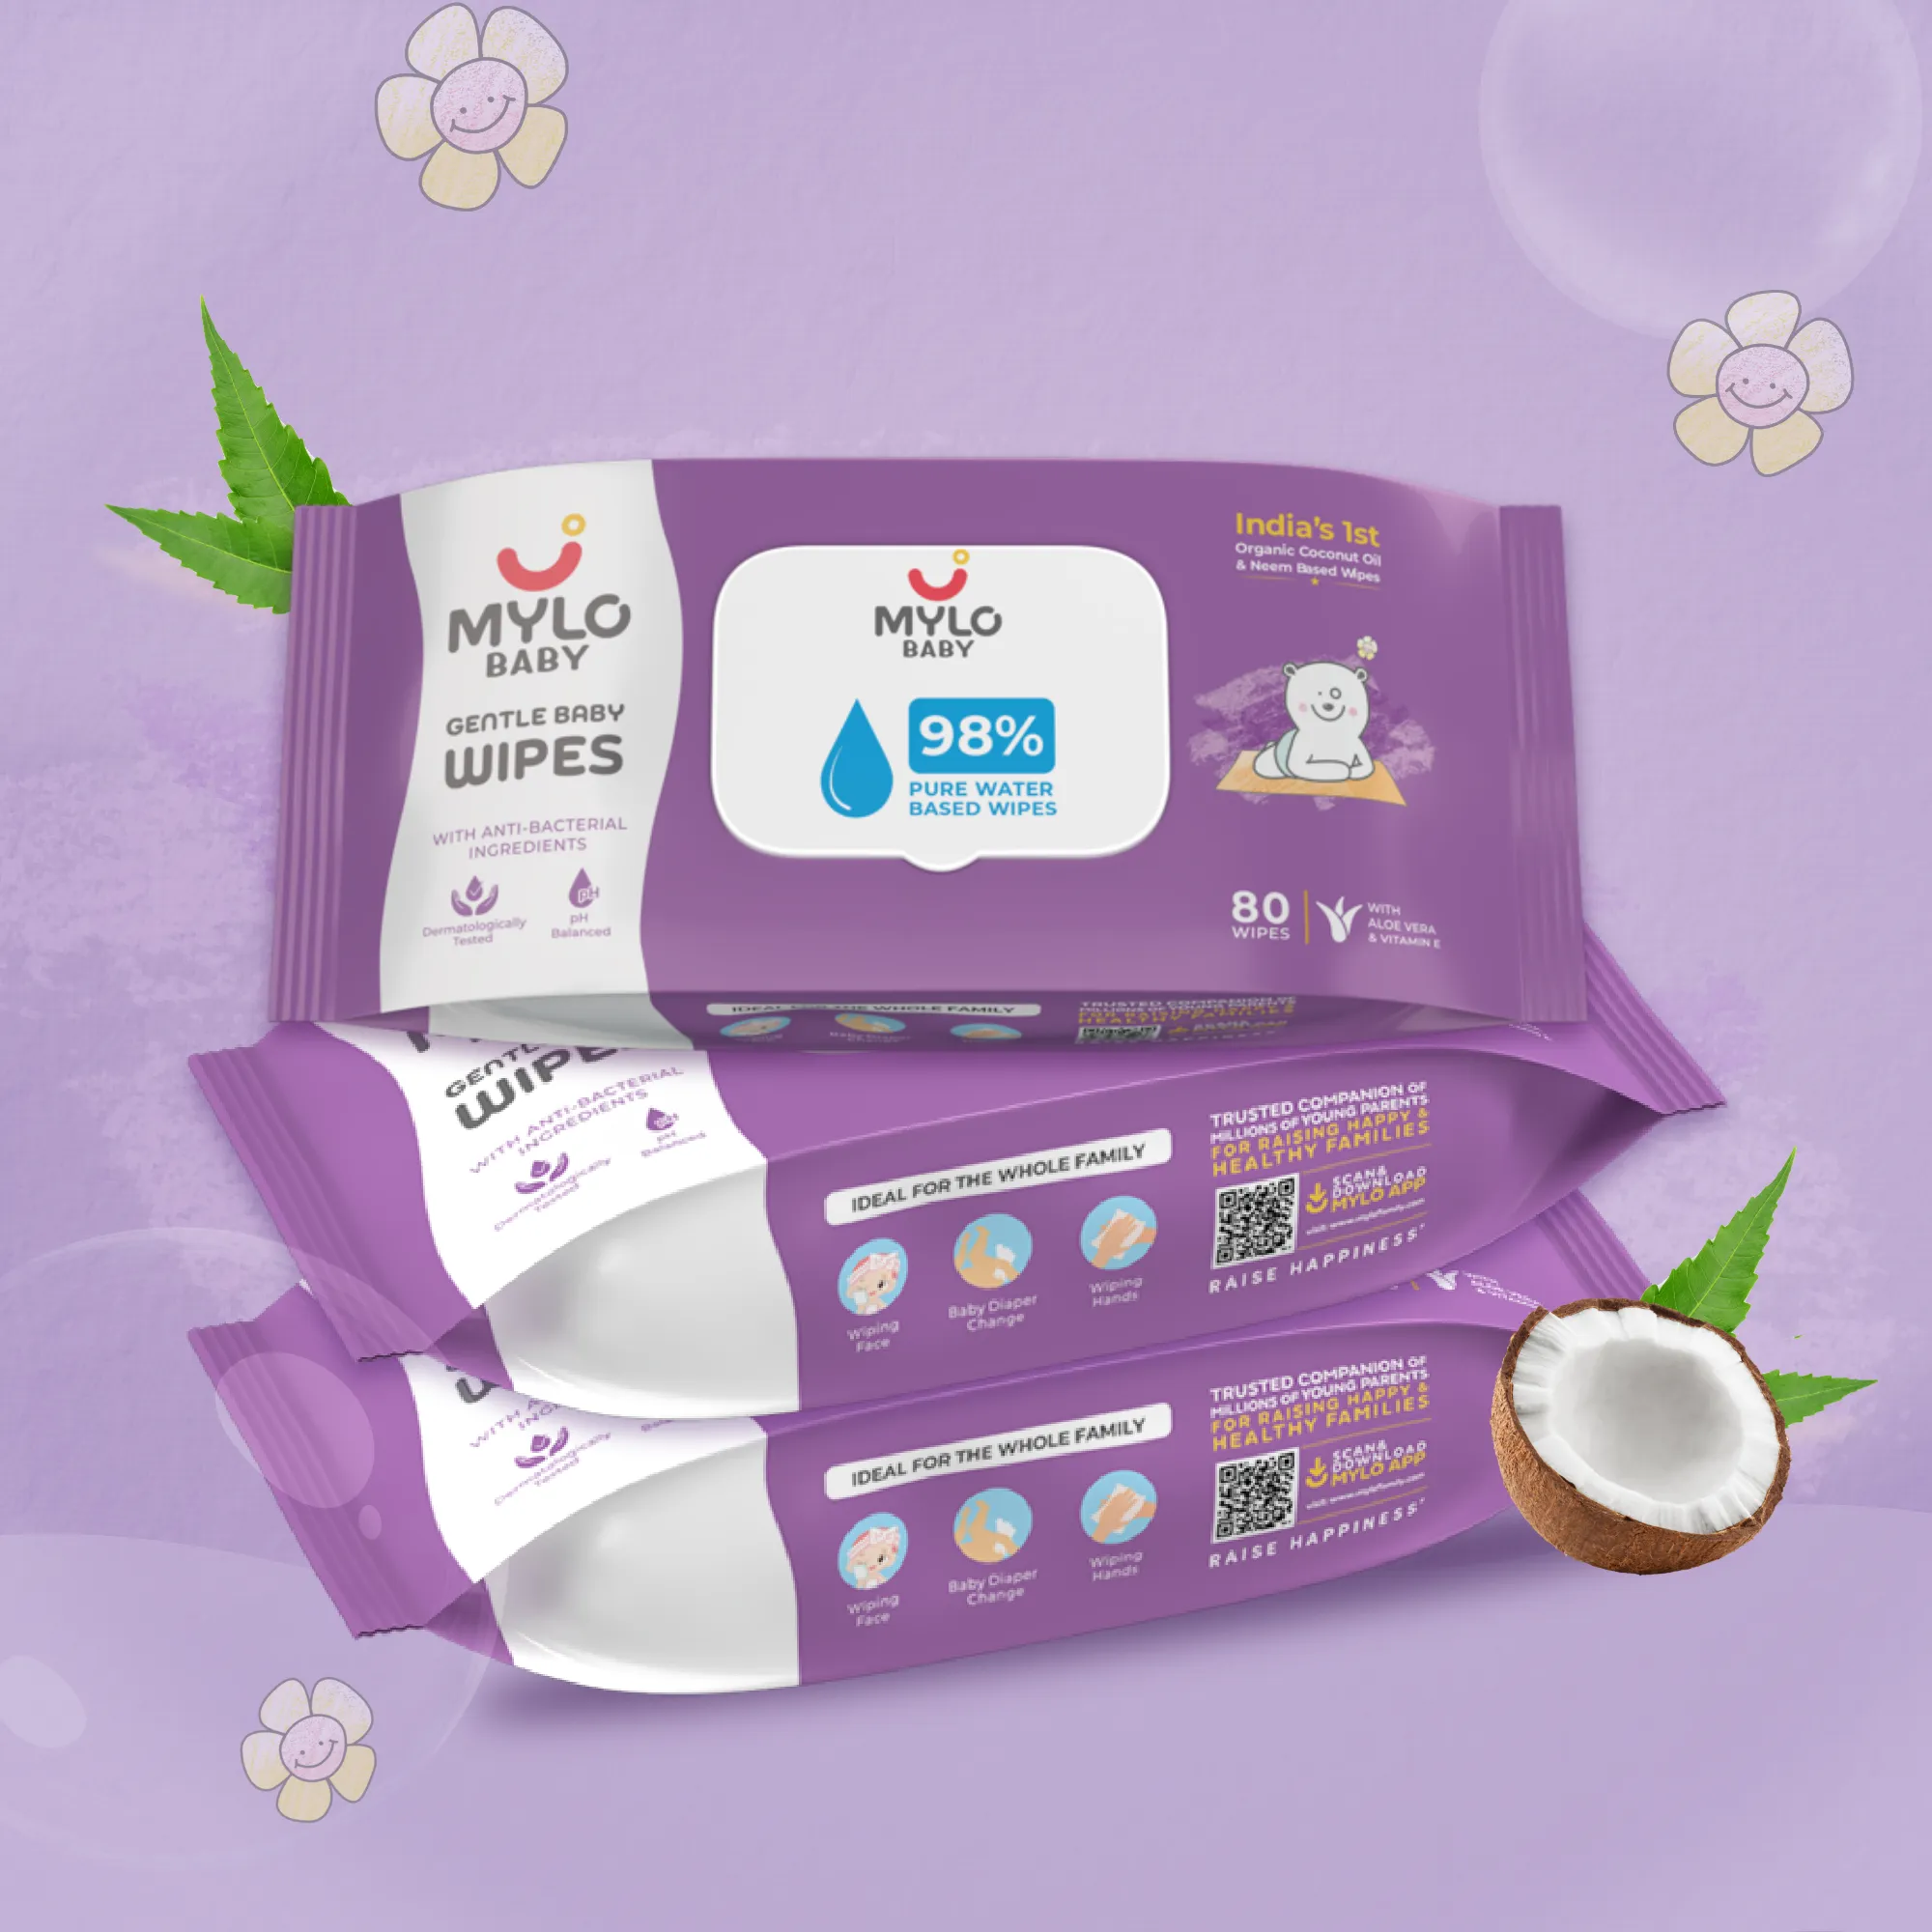 Gentle Baby Wipes with Organic Coconut Oil & Neem With Lid (80 wipes x 3 packs)